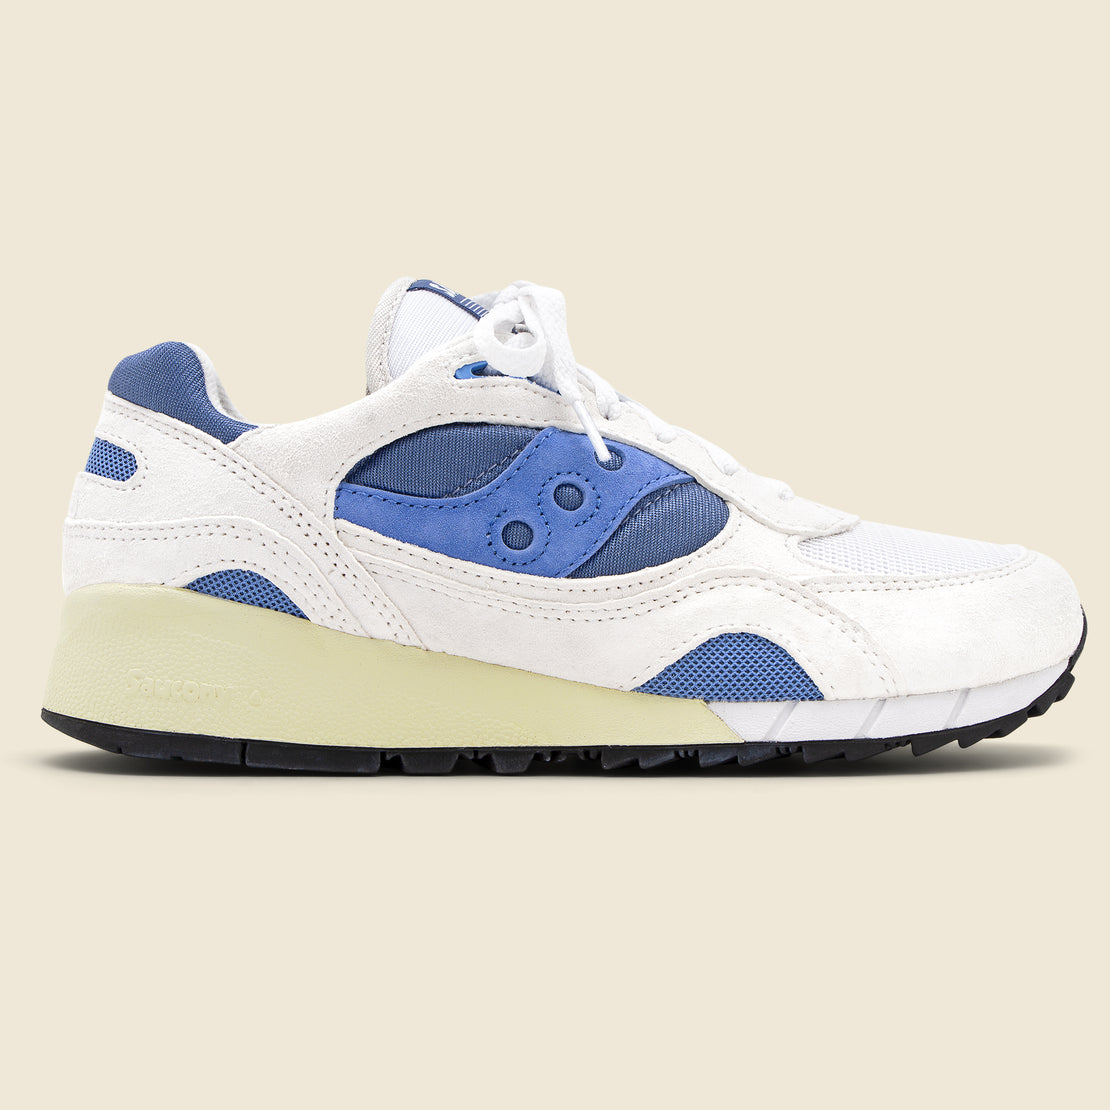 Saucony Shadow 6000 Sneaker- White/Blue